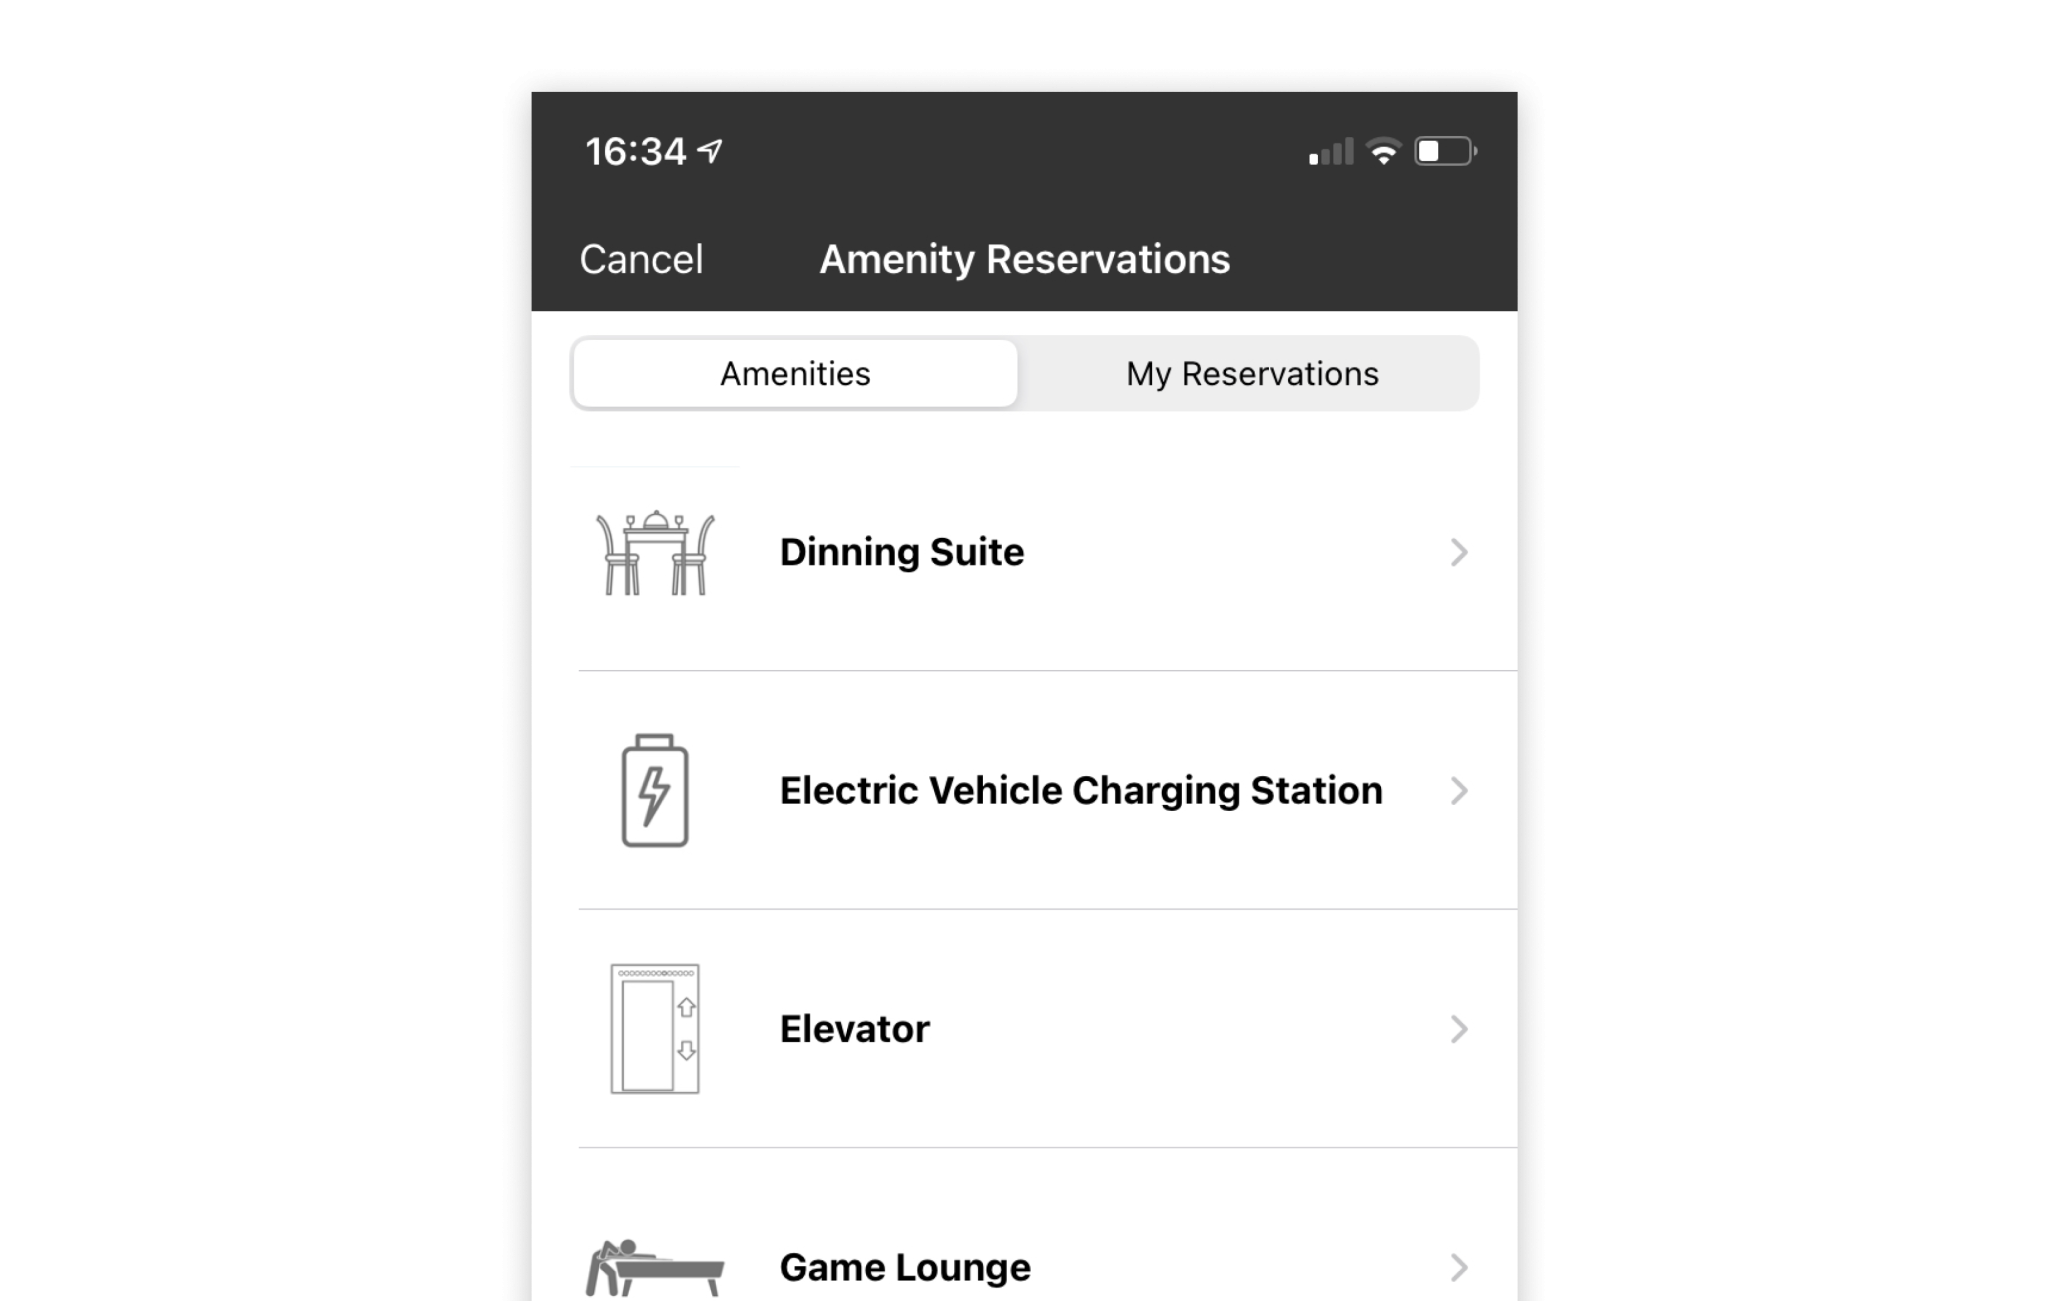 Amenity Reservations